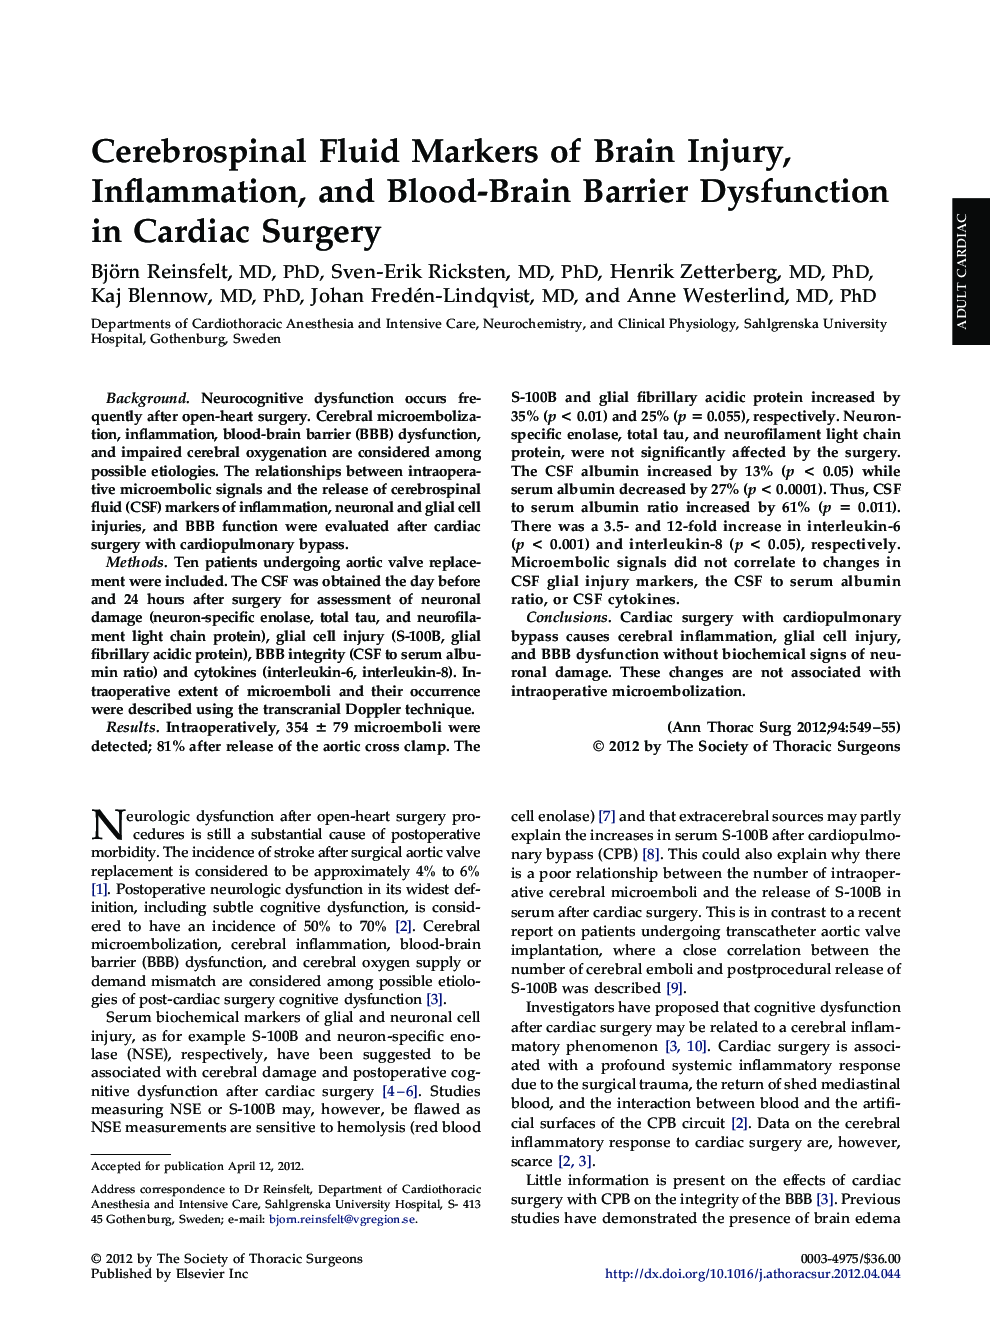 Cerebrospinal Fluid Markers of Brain Injury, Inflammation, and Blood-Brain Barrier Dysfunction in Cardiac Surgery